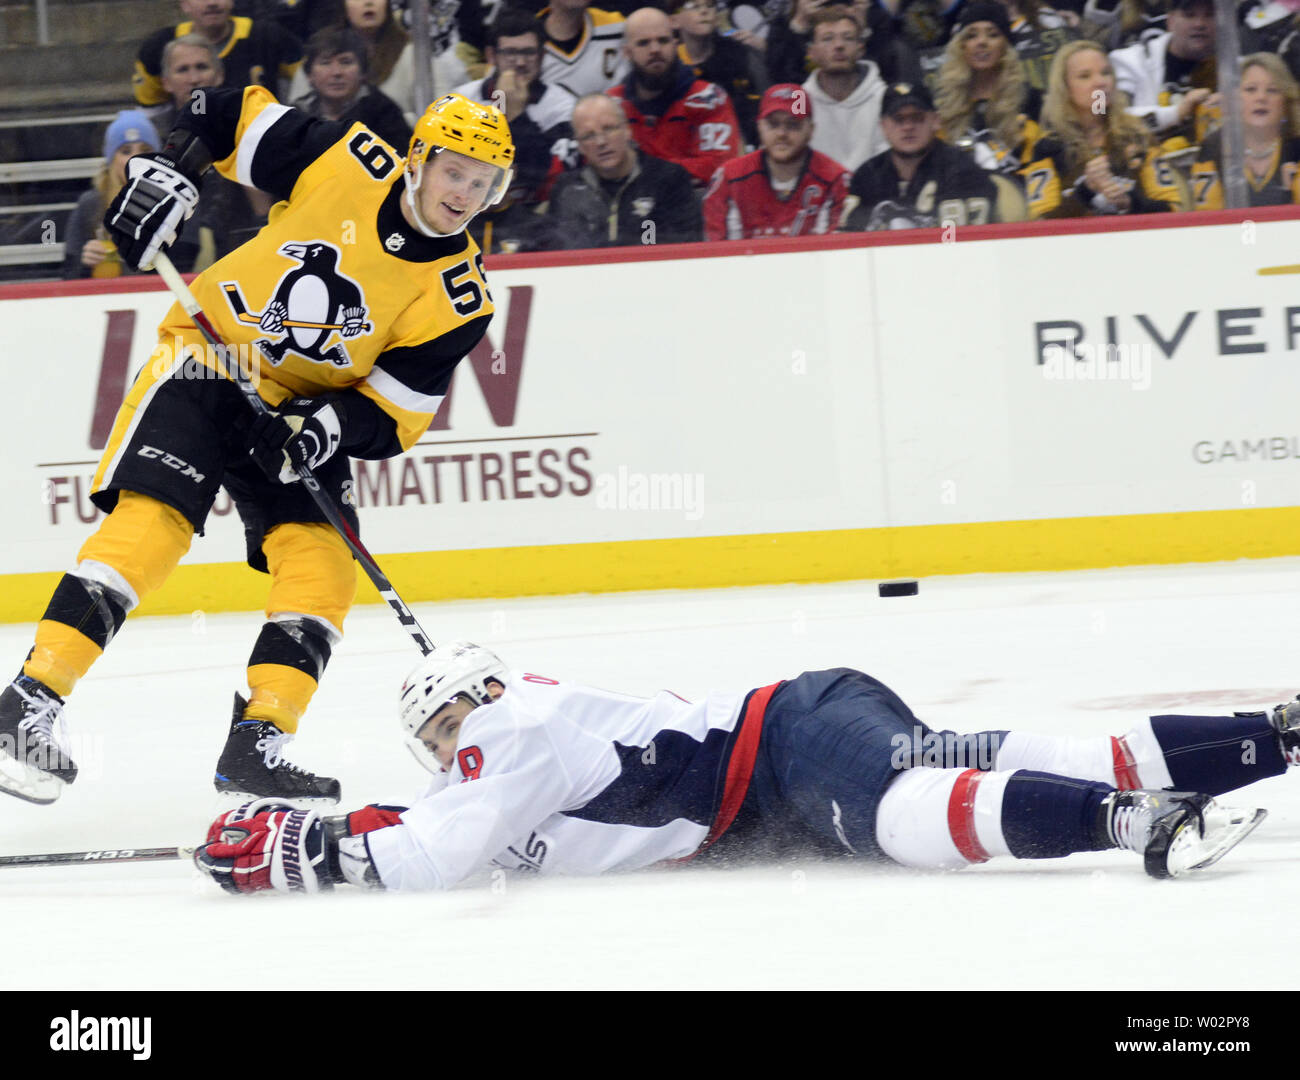 Pittsburgh Penguins left wing Jake Guentzel (59) takes a shot over the diving Washington Capitals defenseman Dmitry Orlov (9) during the third period of the Pens 5-3 win at PPG Paints Arena in Pittsburgh on March 12, 2018.   Photo by Archie Carpenter/UPI Stock Photo